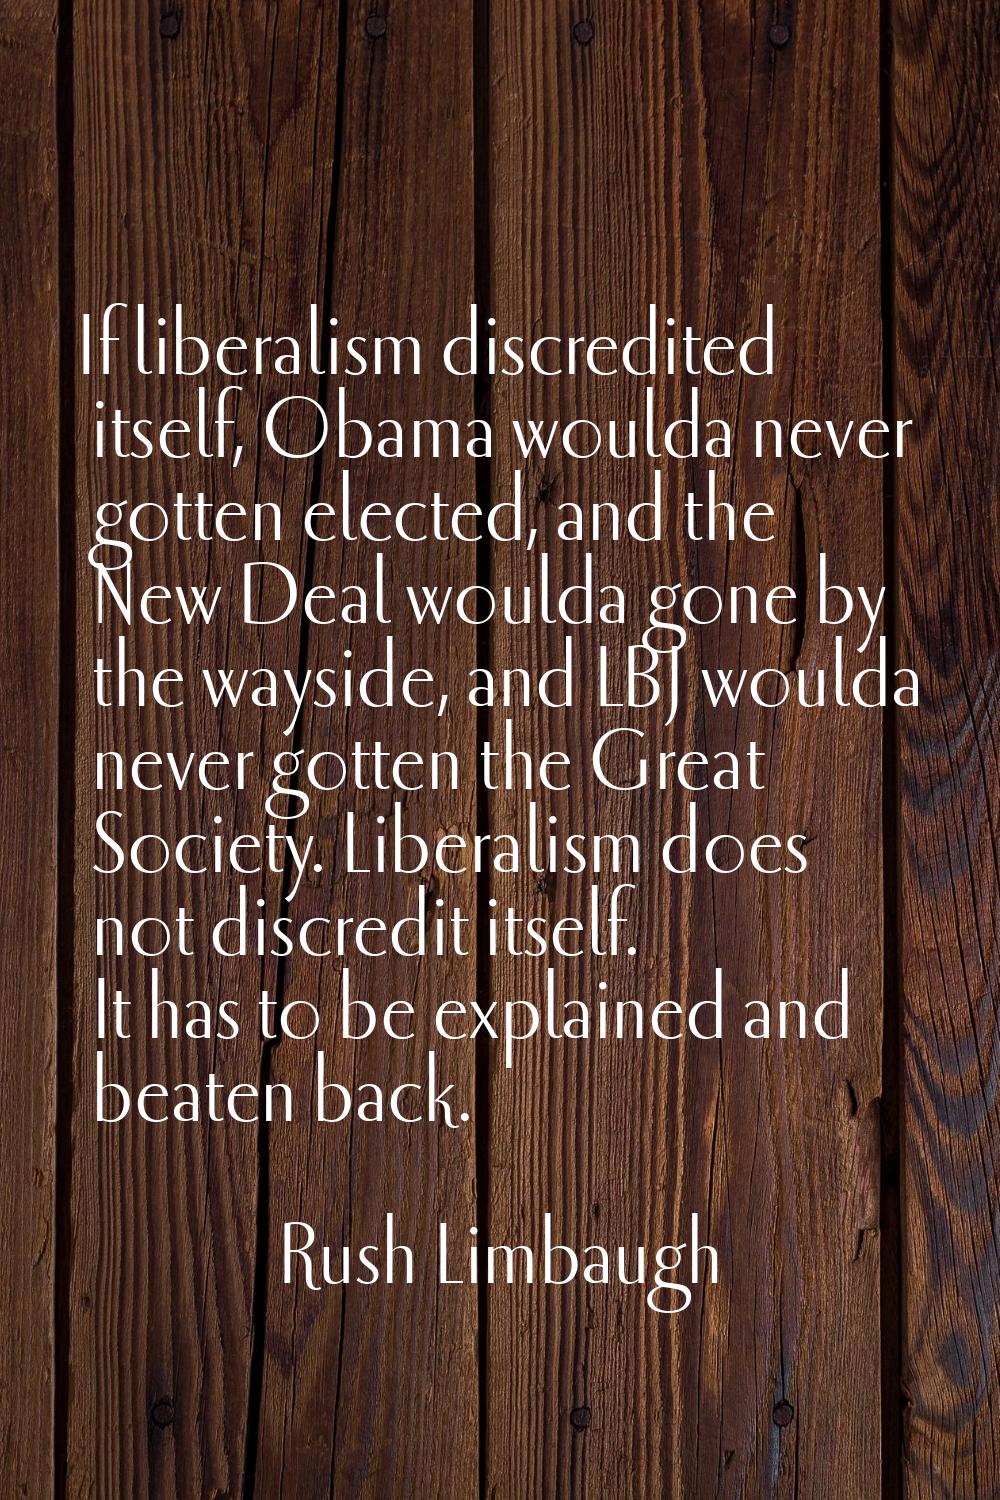 If liberalism discredited itself, Obama woulda never gotten elected, and the New Deal woulda gone b